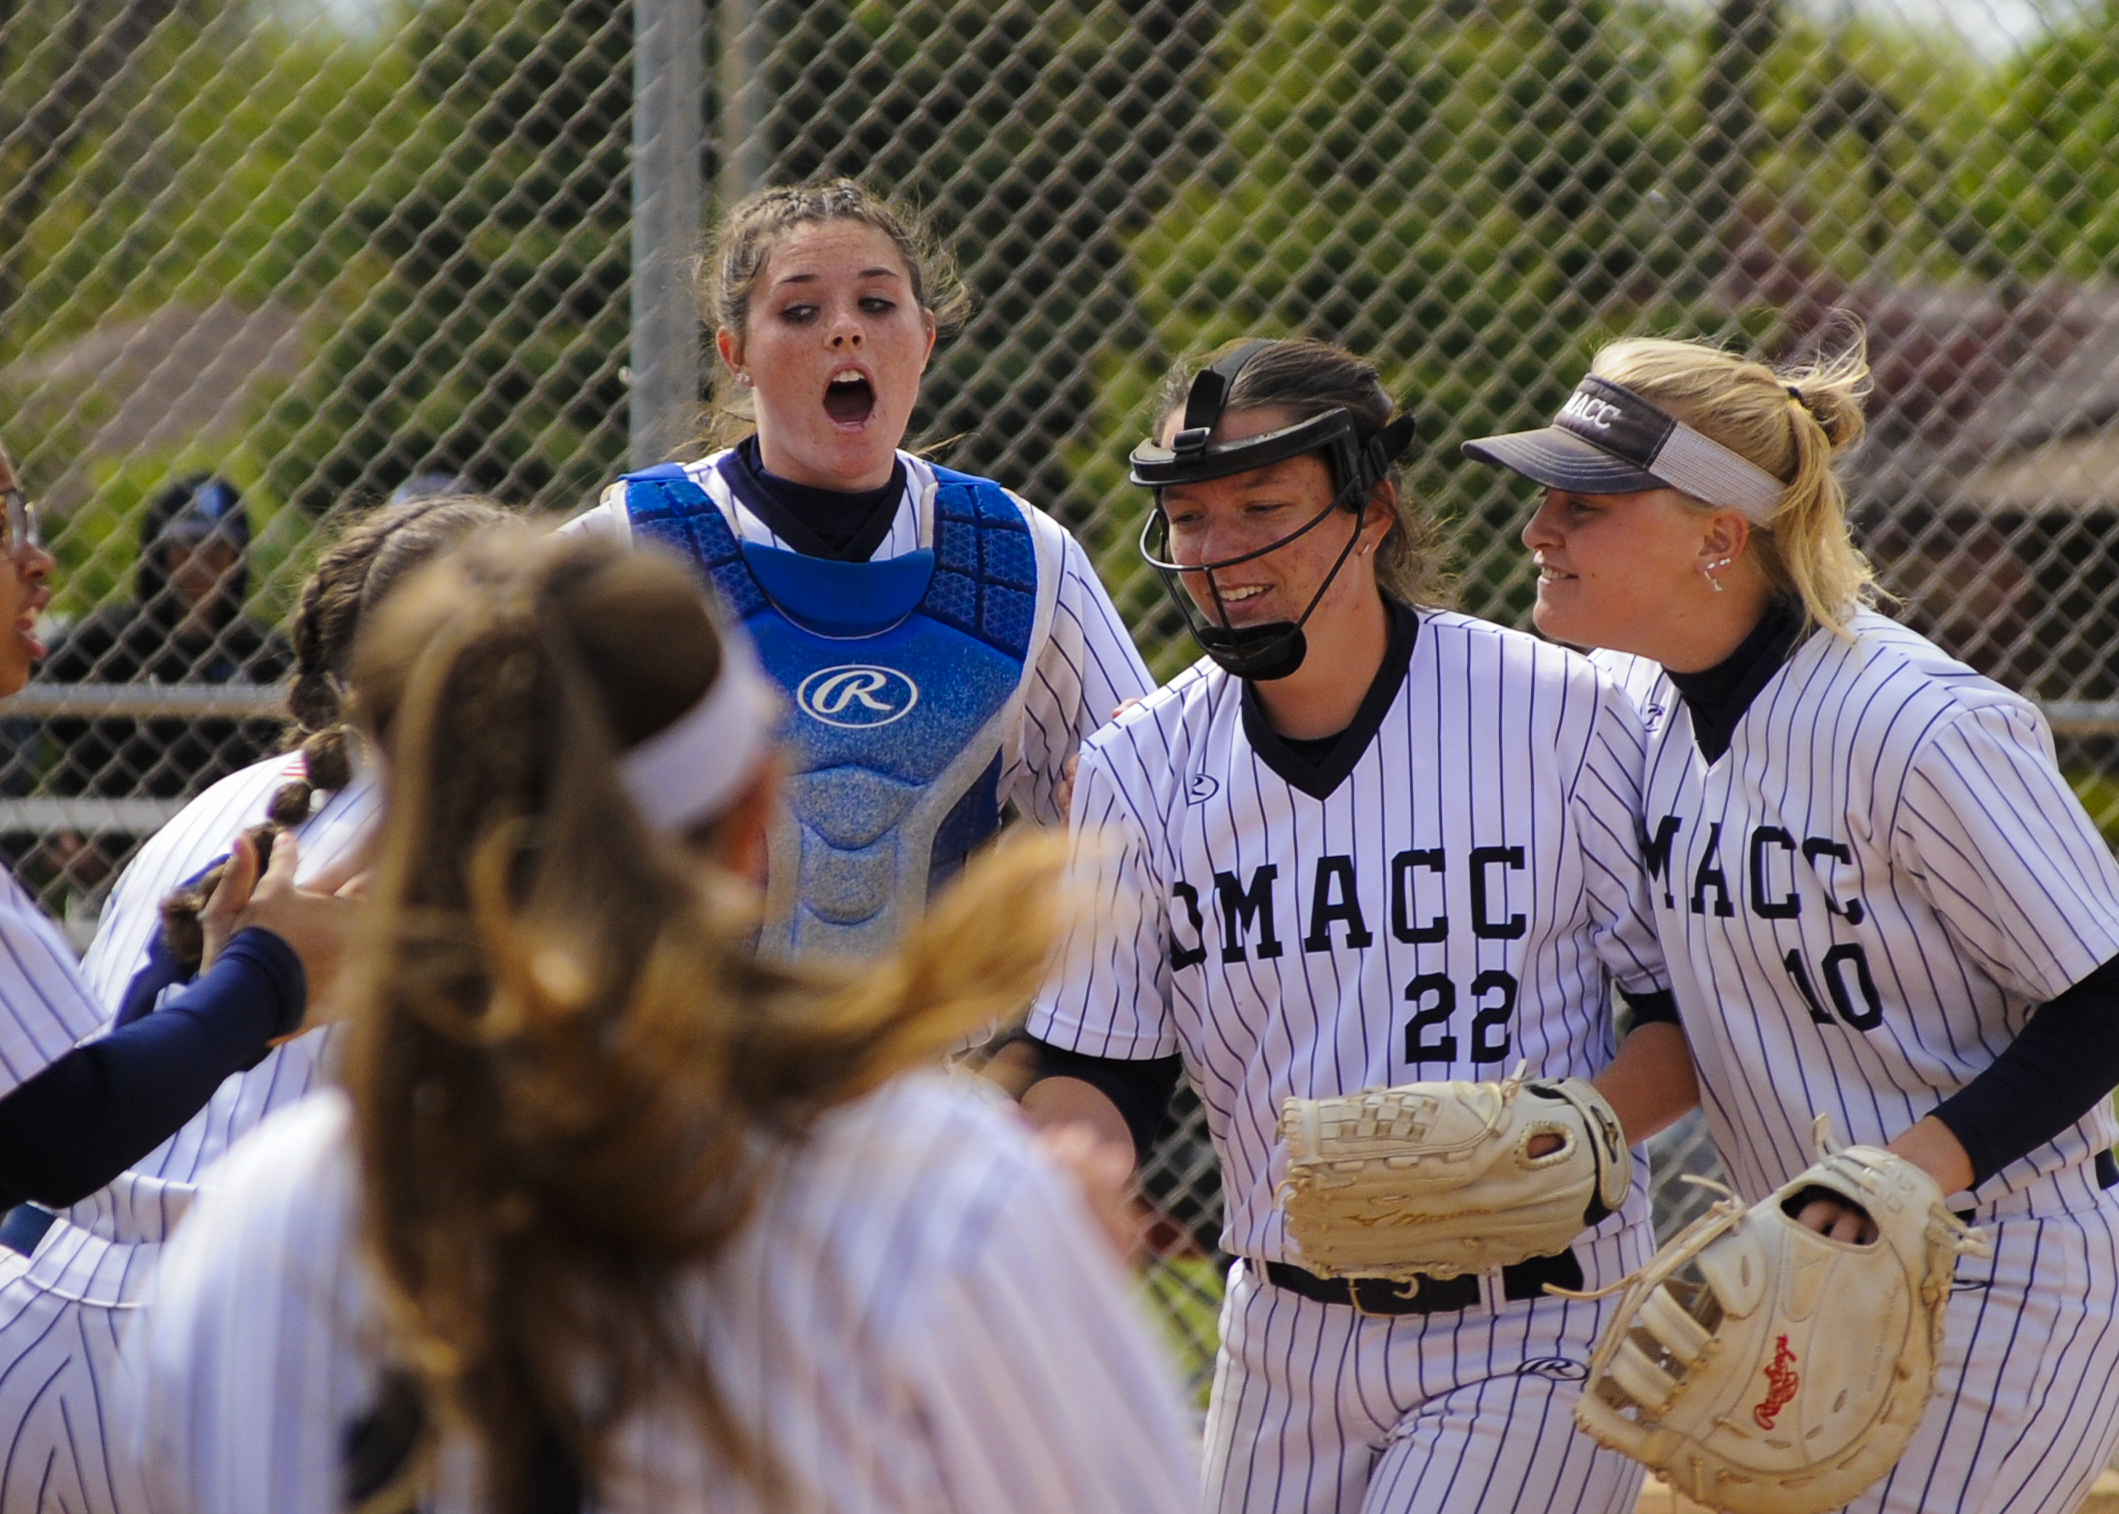 DMACC softball team wins North Plains District B title; qualifies for national championship